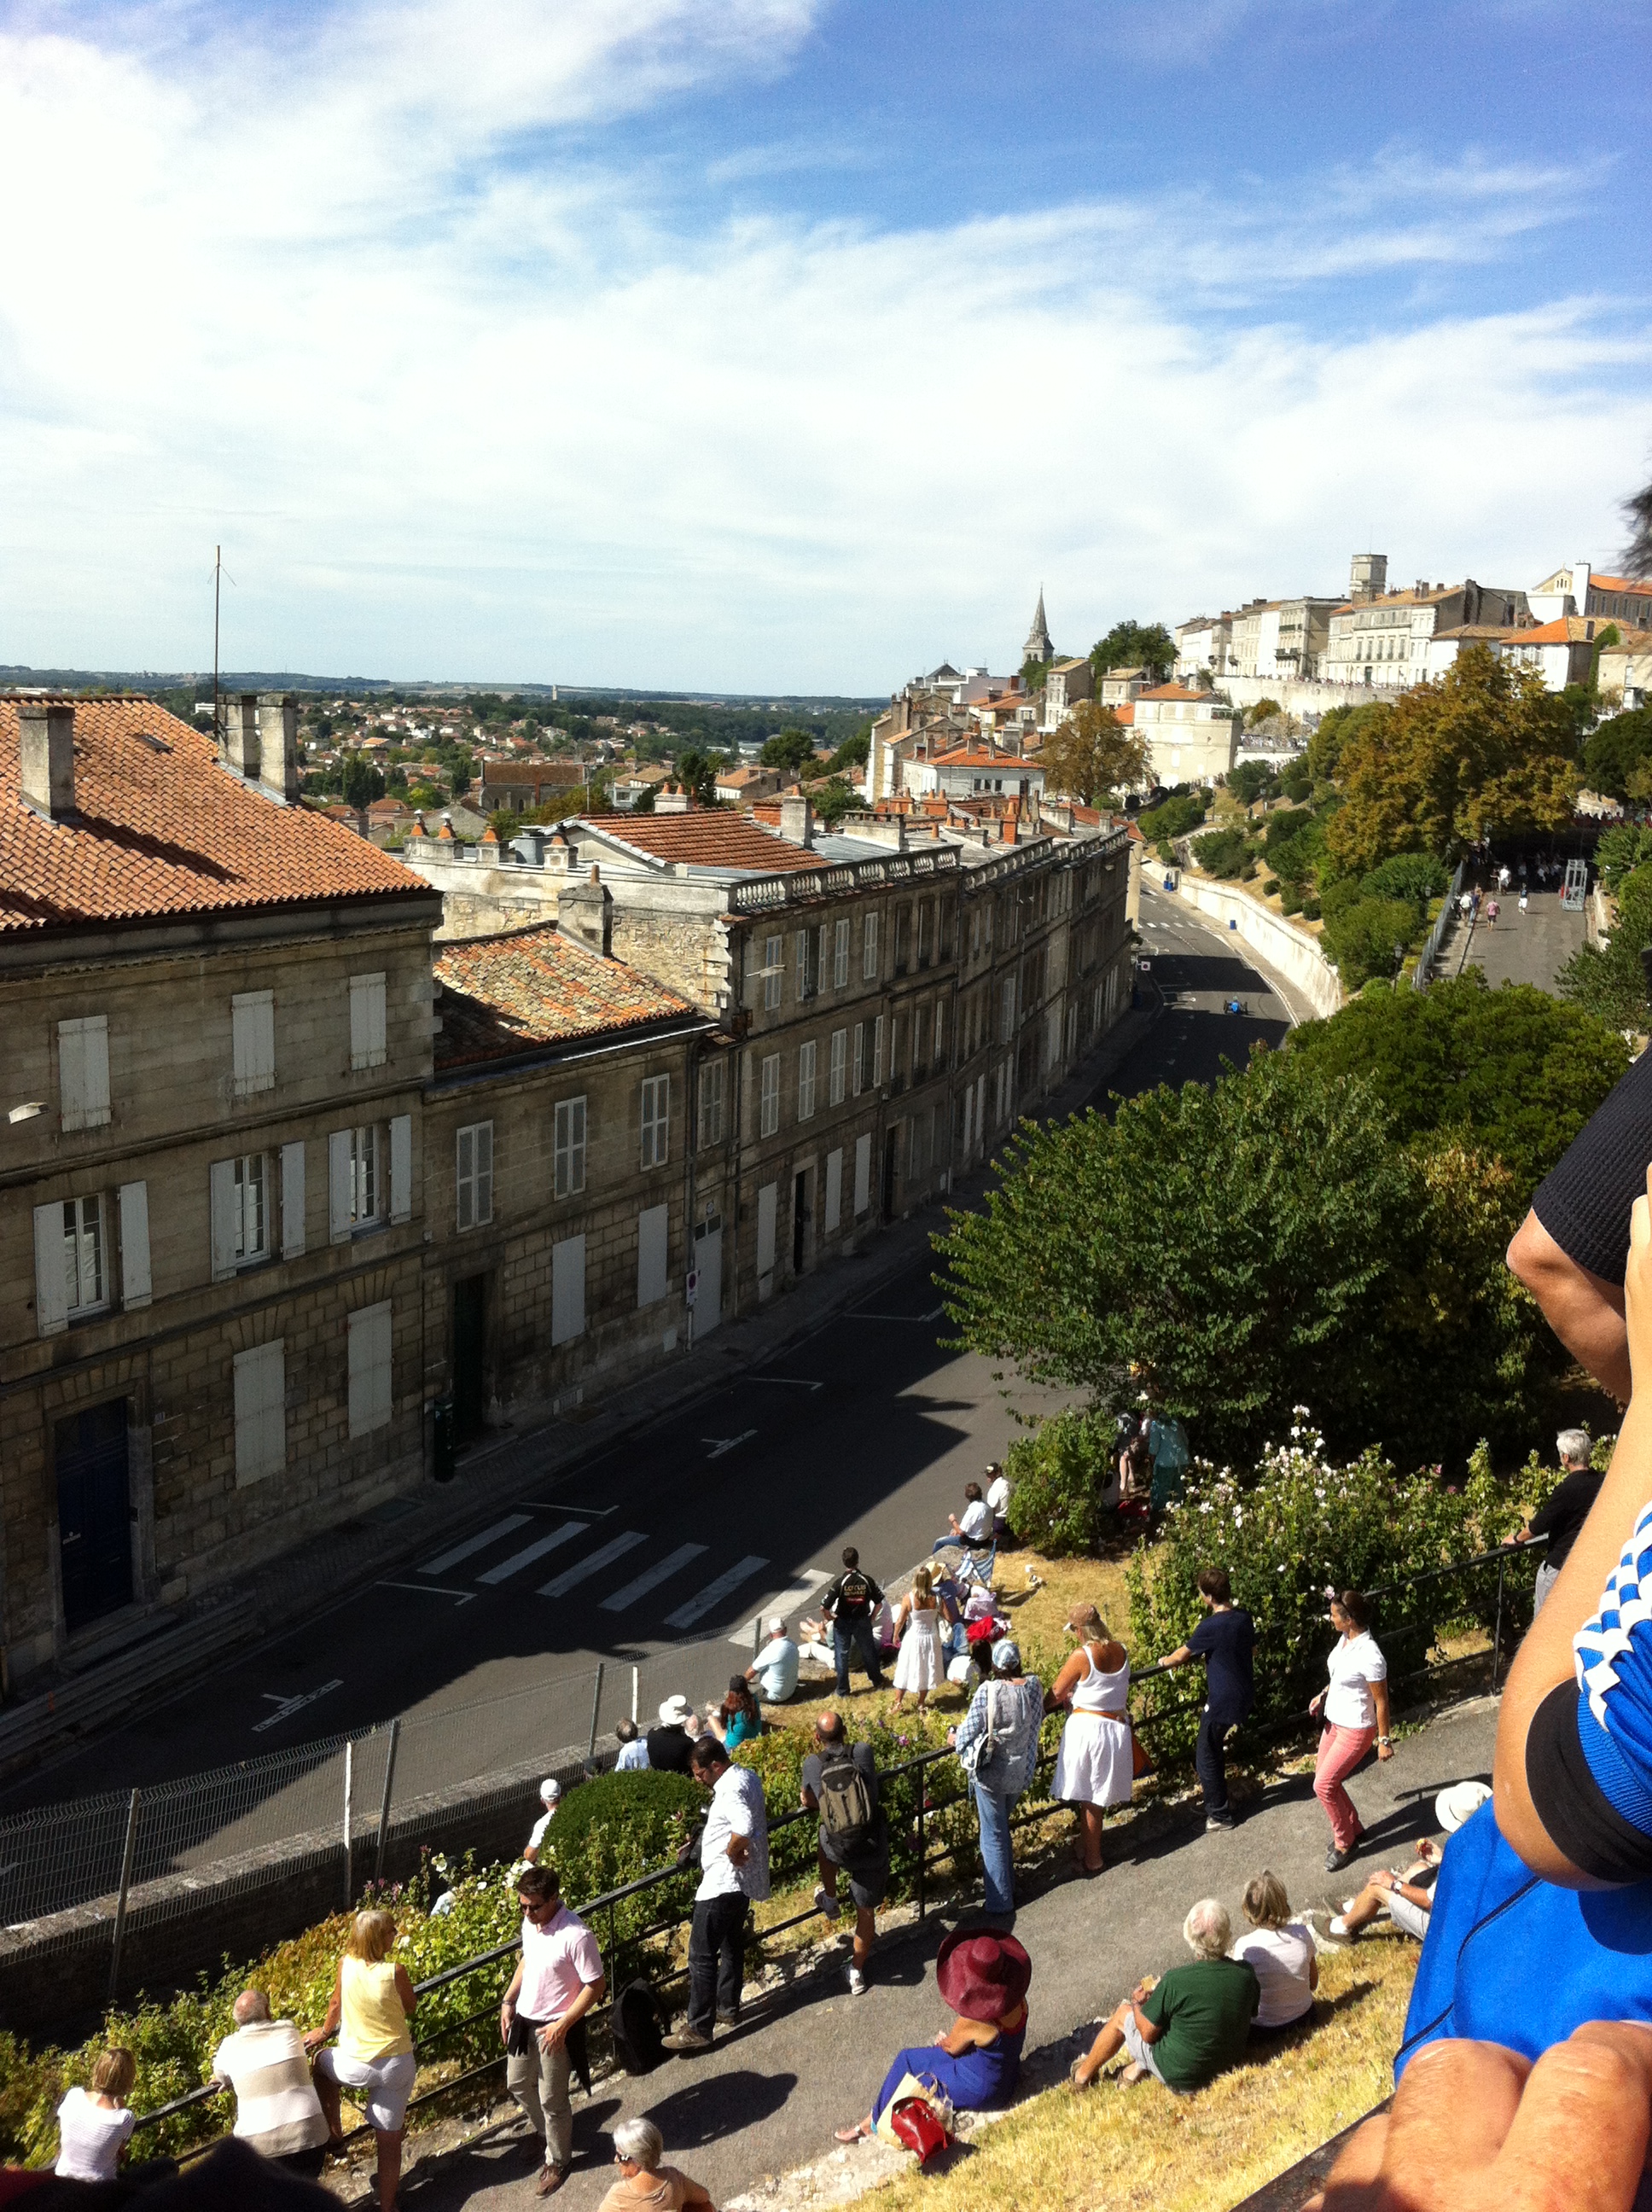 Enjoying the view at Circuit Des Remparts